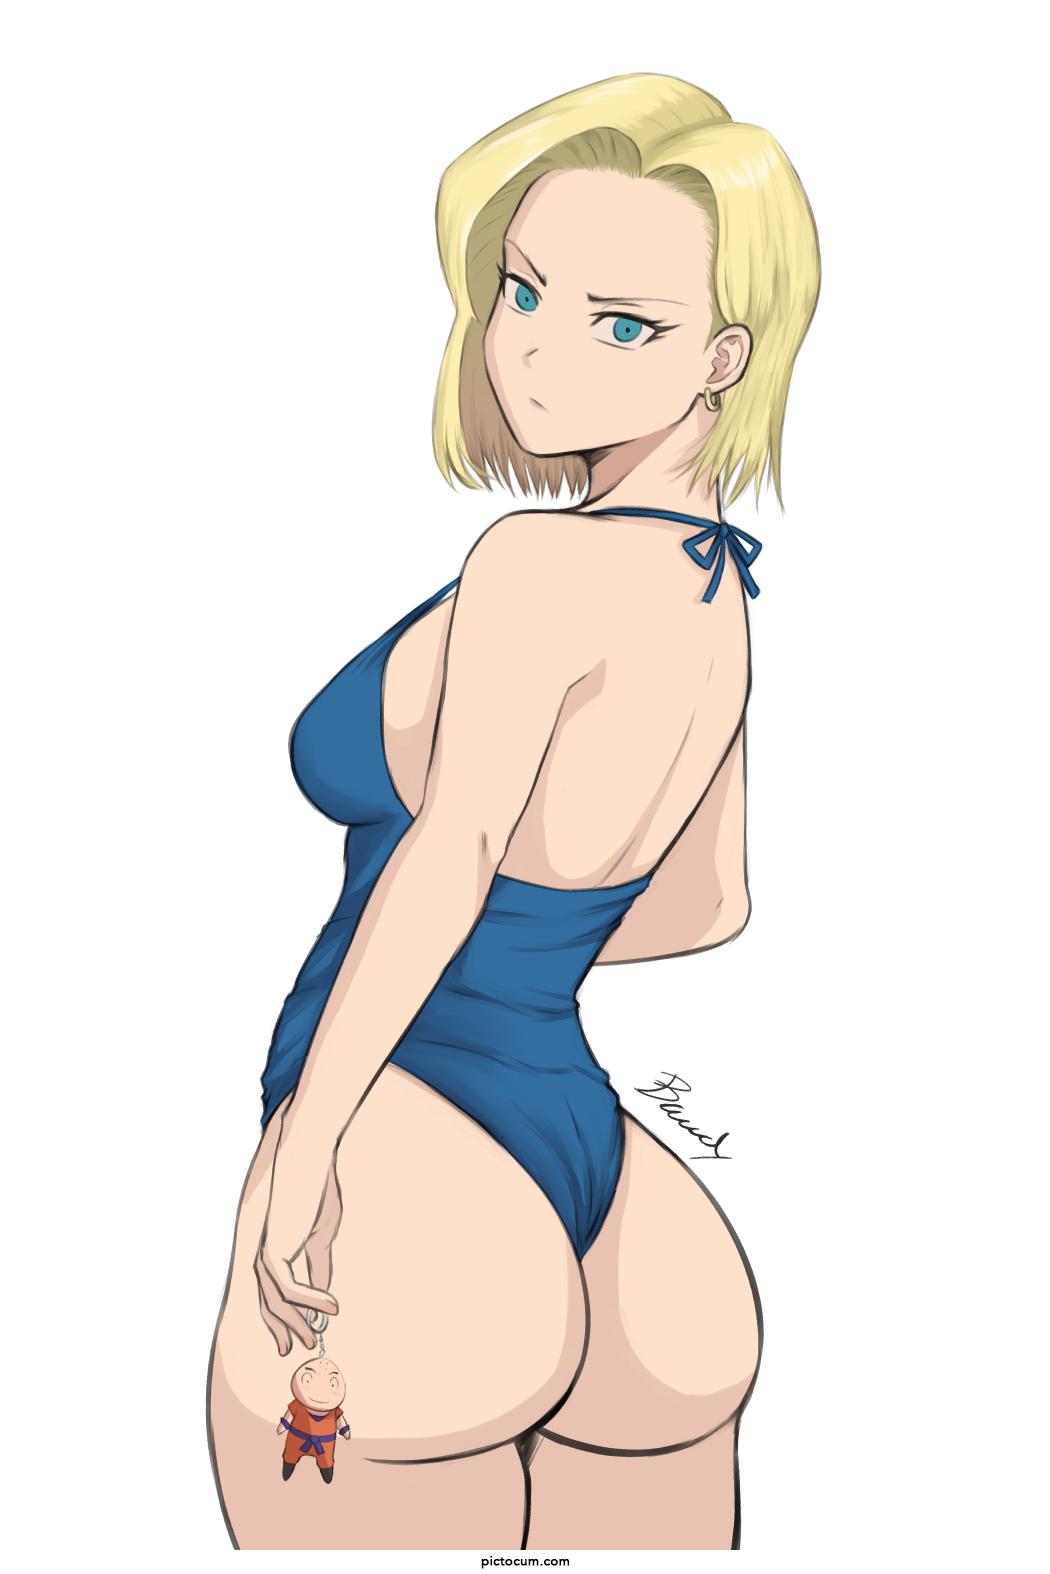 Android 18's new swimsuit